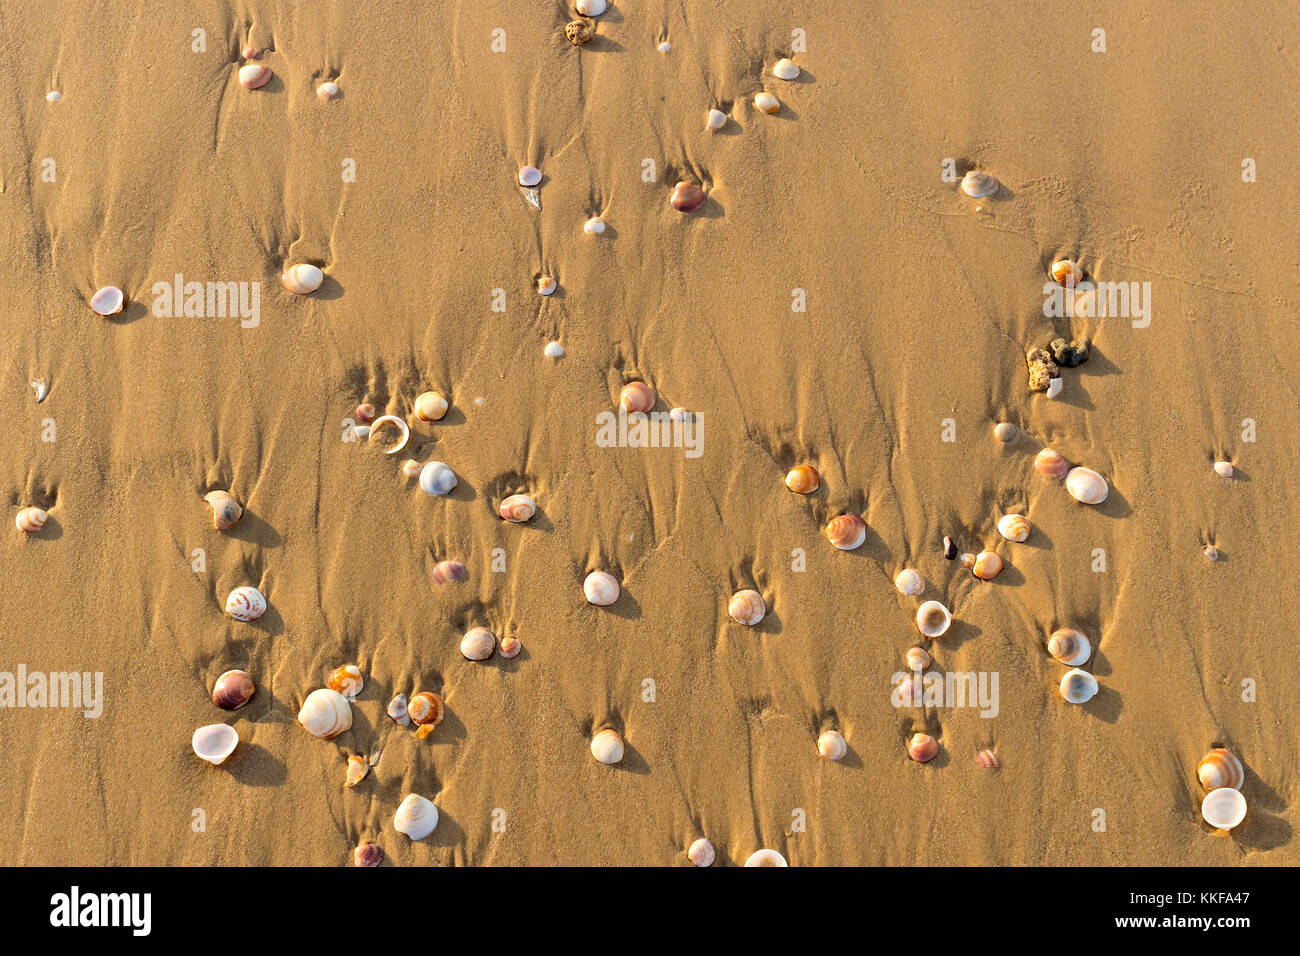 Background of sea sand with shells close-up Stock Photo